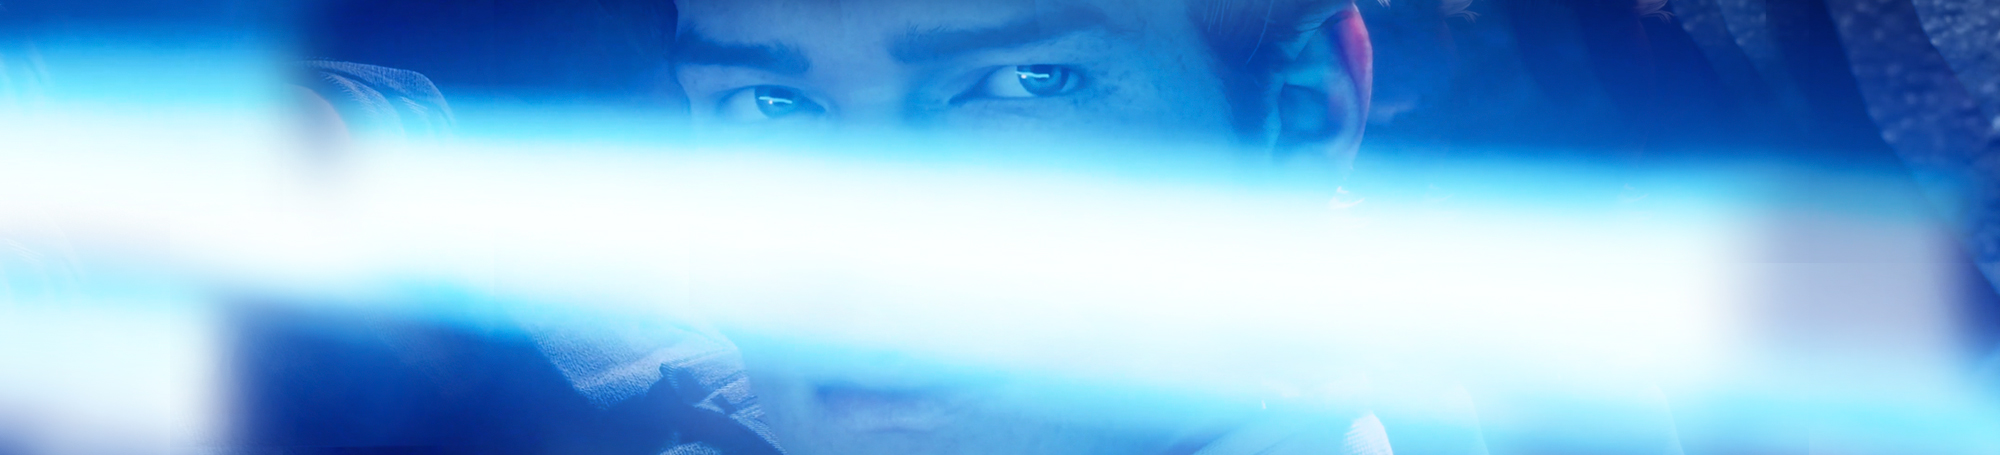 Young man's face lit up by blue laser sword